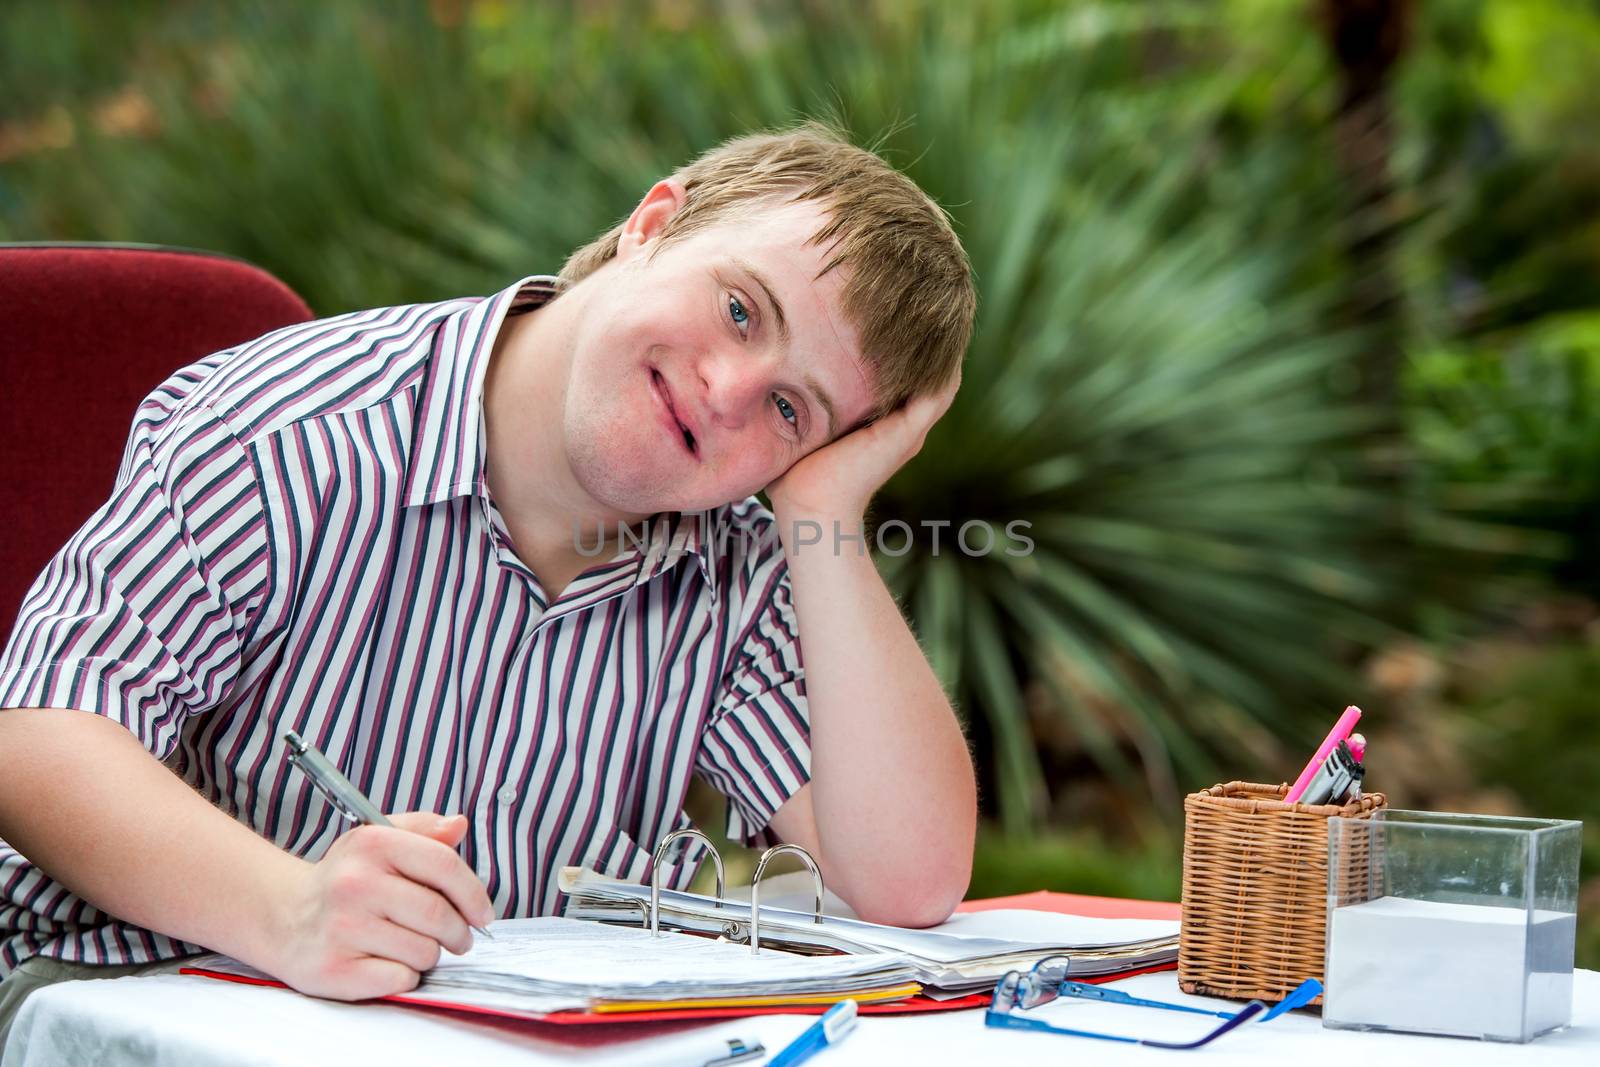 Close up portrait of Handicapped student resting on hand at desk in garden.